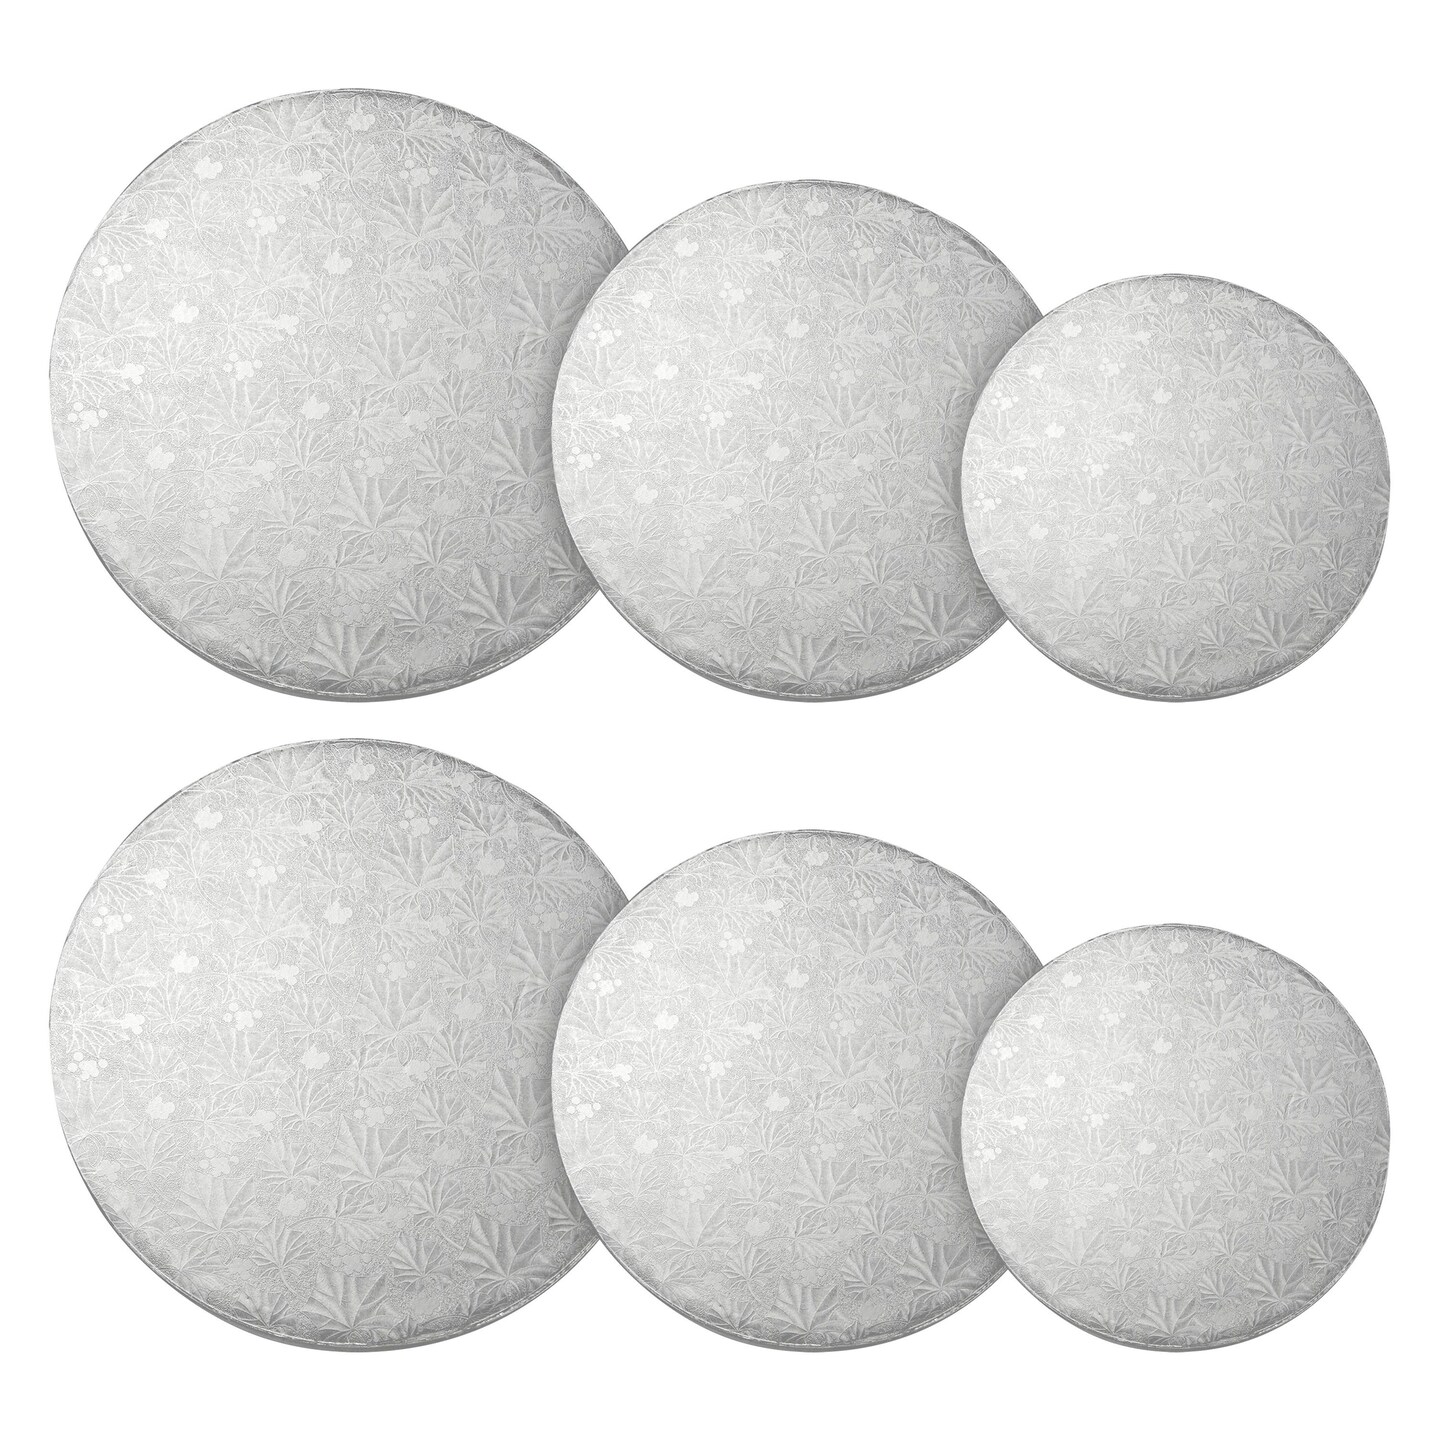 Set Of 6 Silver Cake Drums 8 10 And 12 Inch Round Boards For Baking